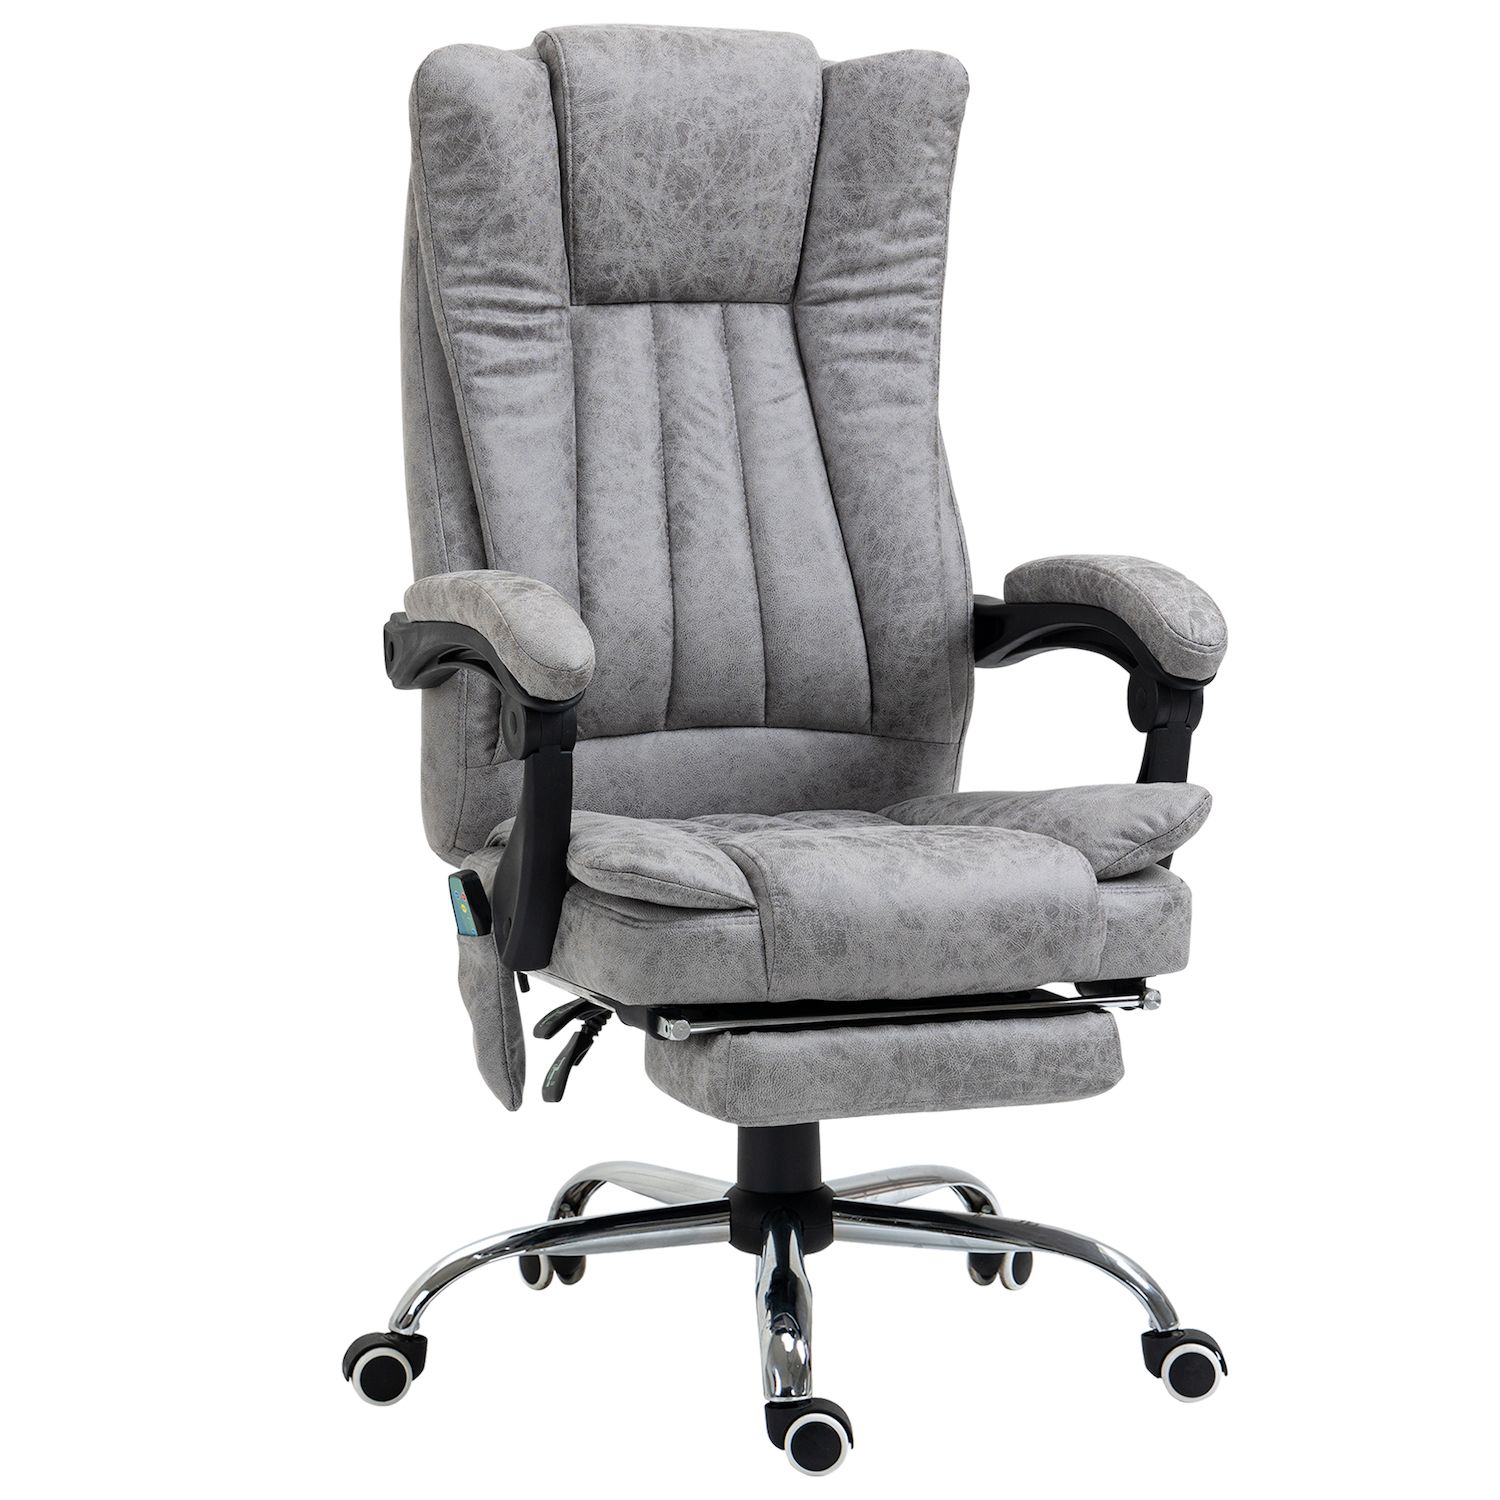 Vinsetto Grey, Ergonomic Home Office Chair High Back Armchair